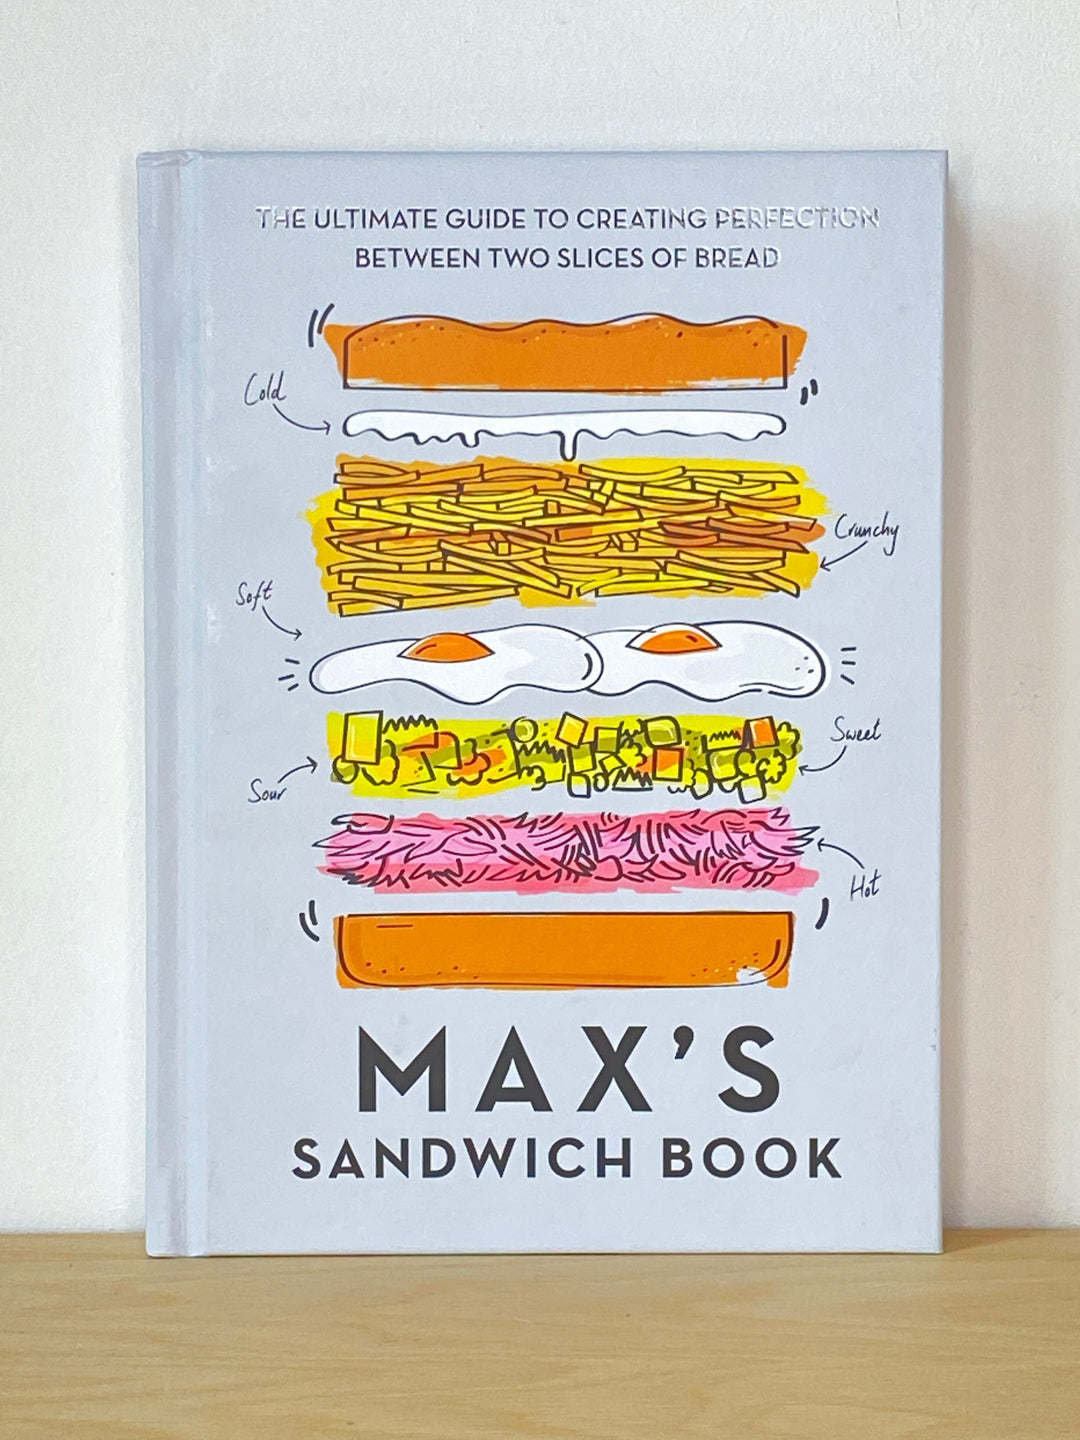 Max's Sandwich book by Max Halley Community Cutlery 